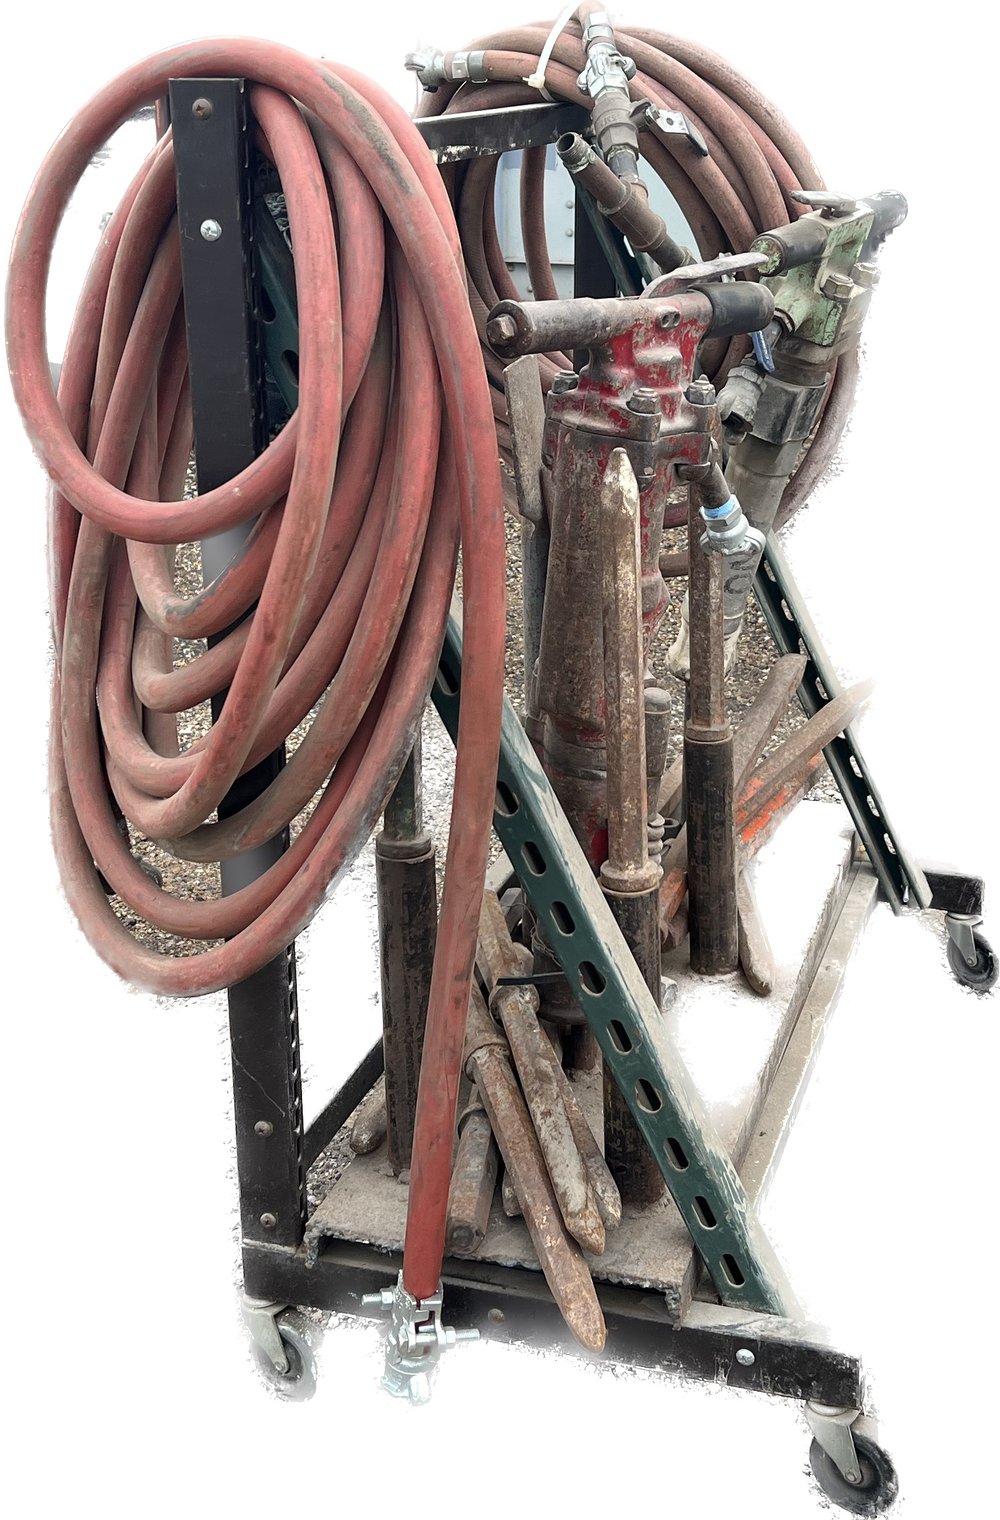 Sullair 90LB AIR JACKHAMMER For Sale (49927761) from Middleburg Rentals  [10726] in Middleburg, PA